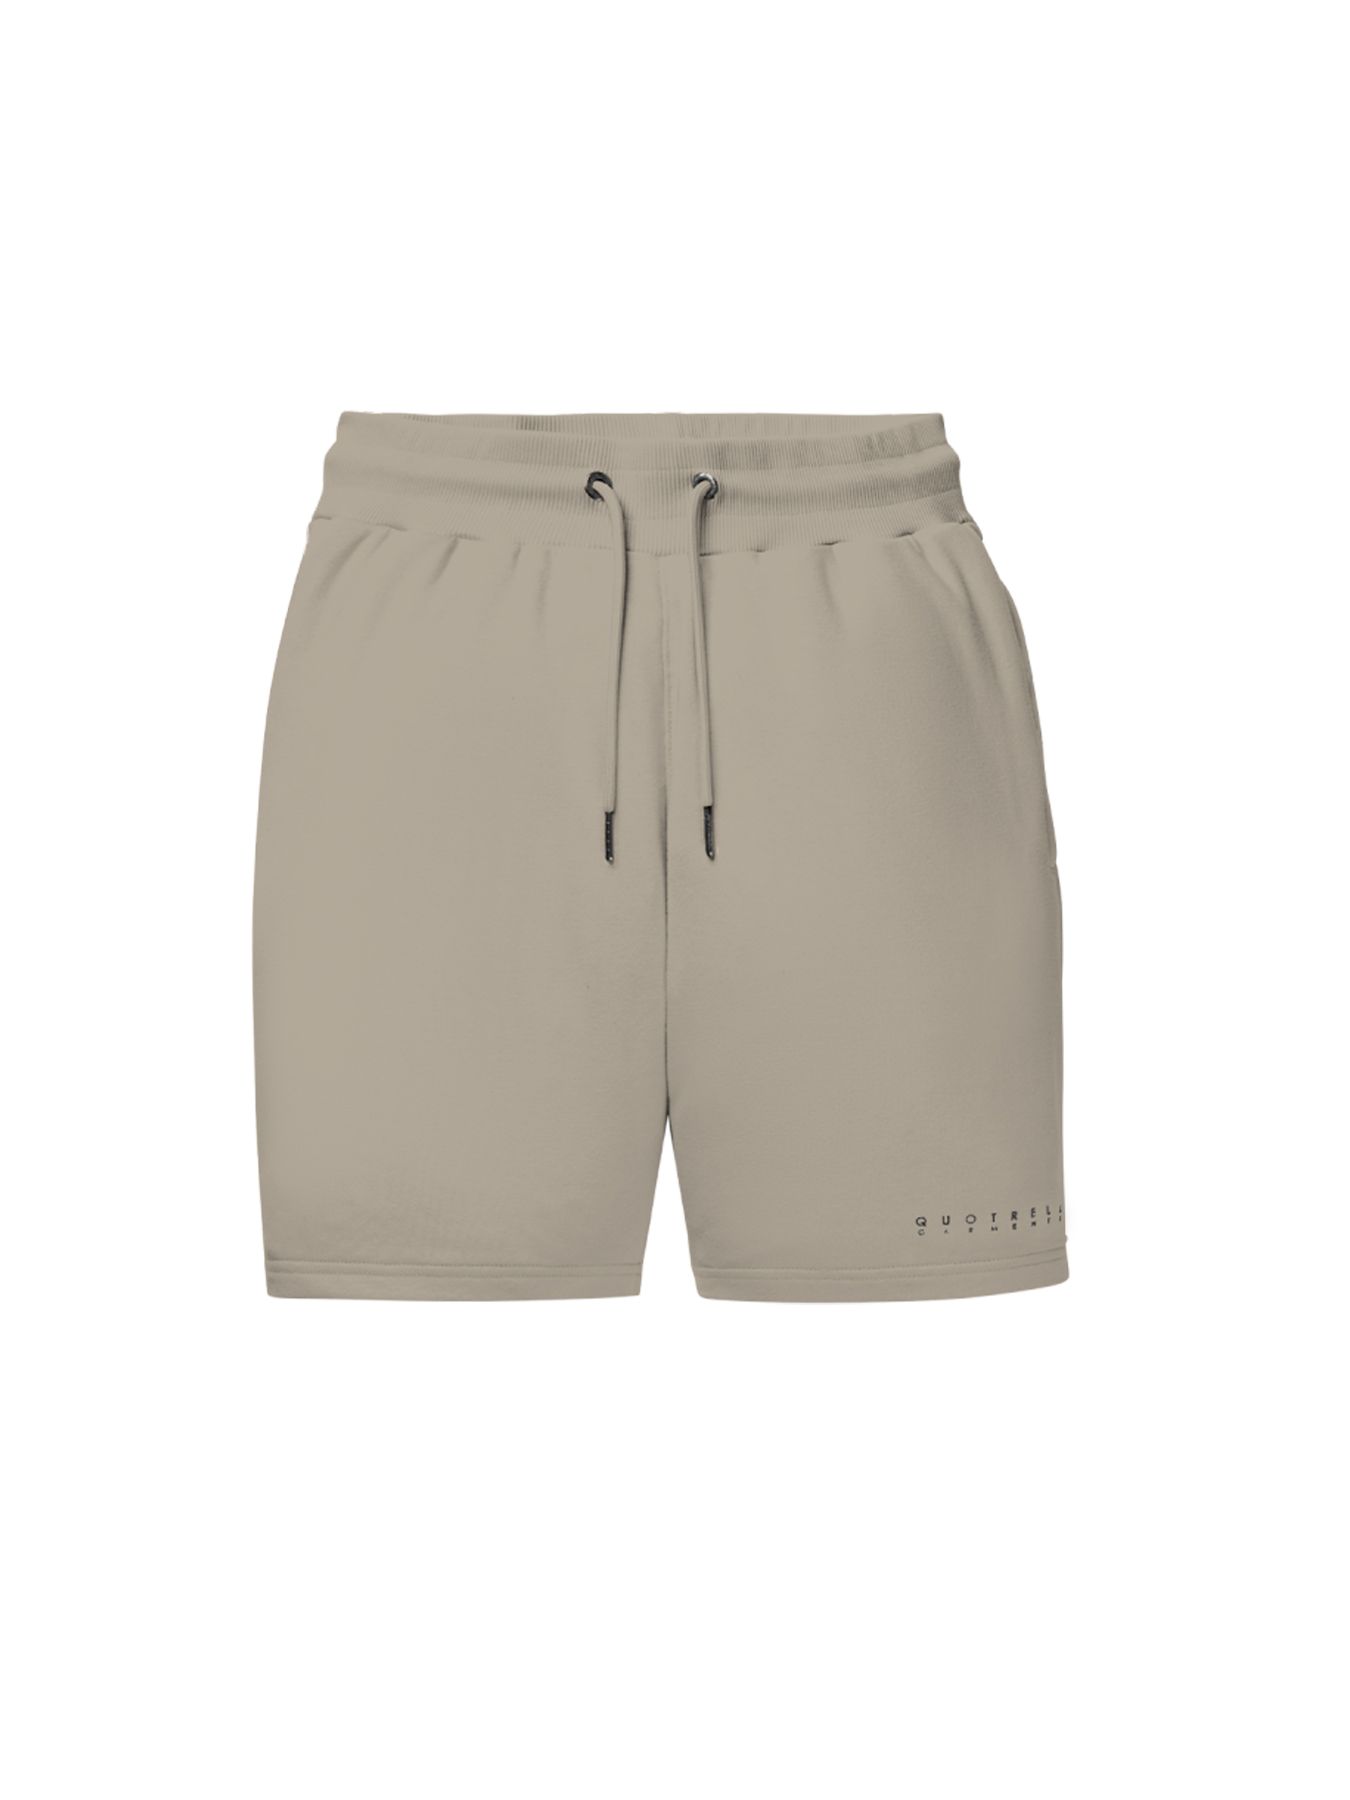 Quotrell Fusa shorts Taupe 00104040-Z4